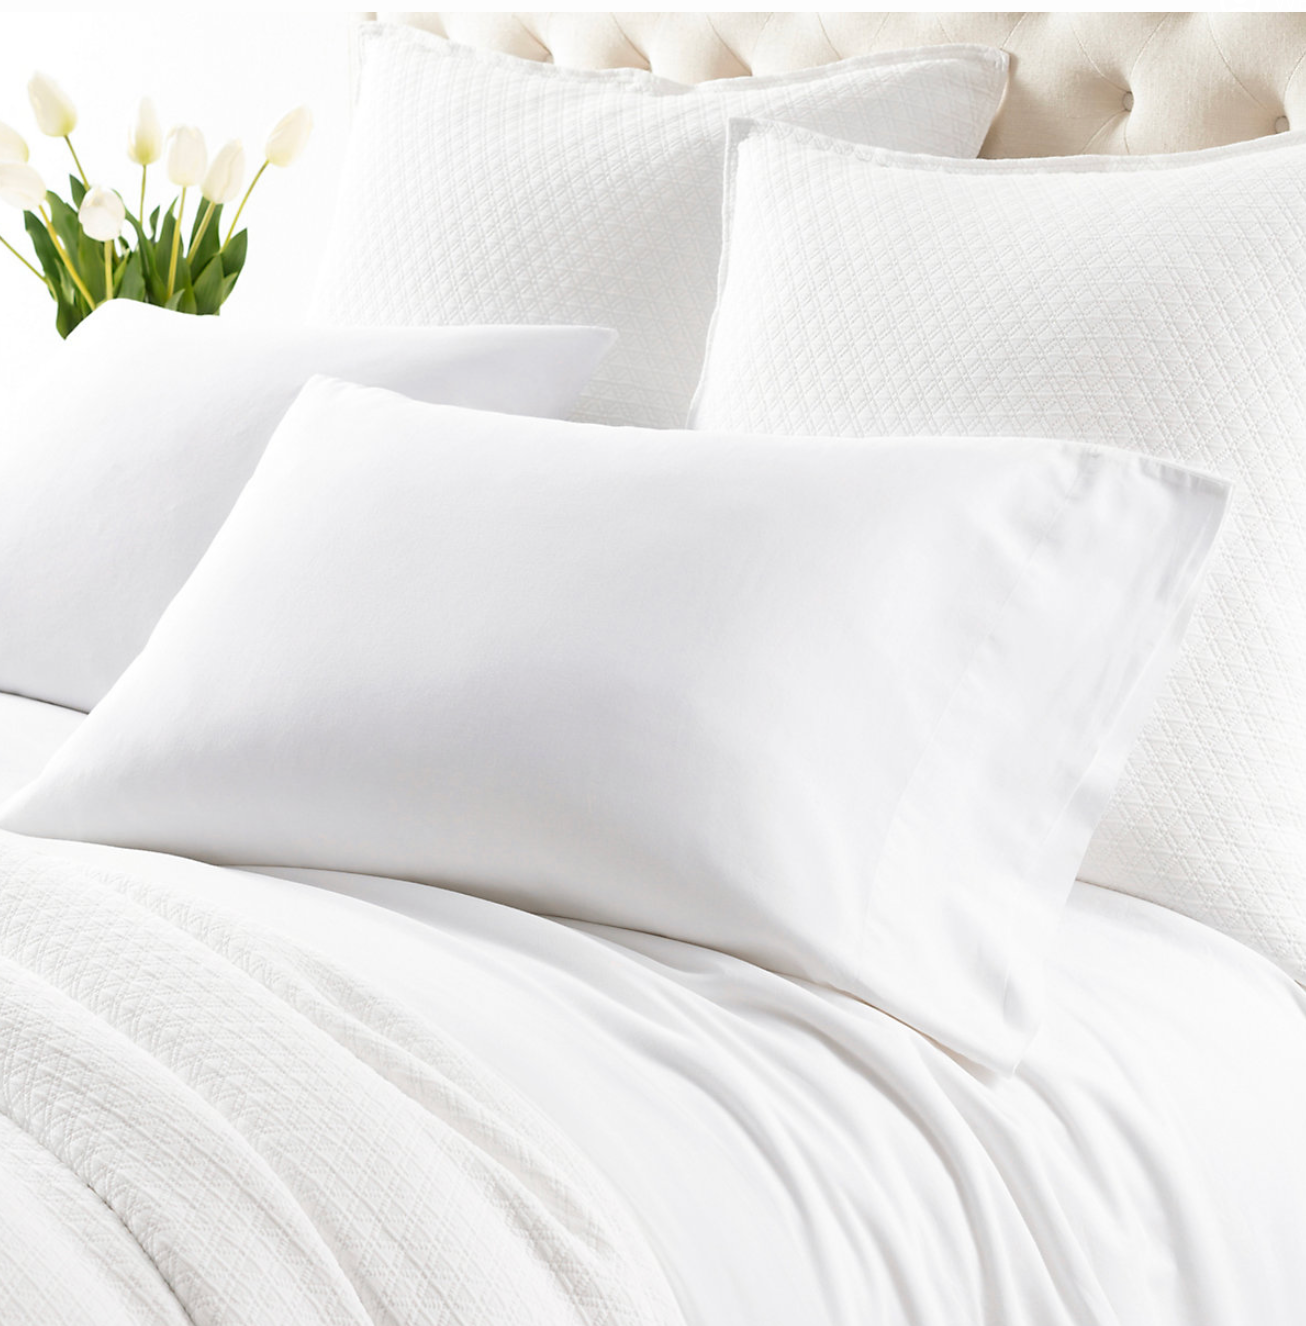 Cozy Cotton White Collection, Sheet Sets and Pillowcases